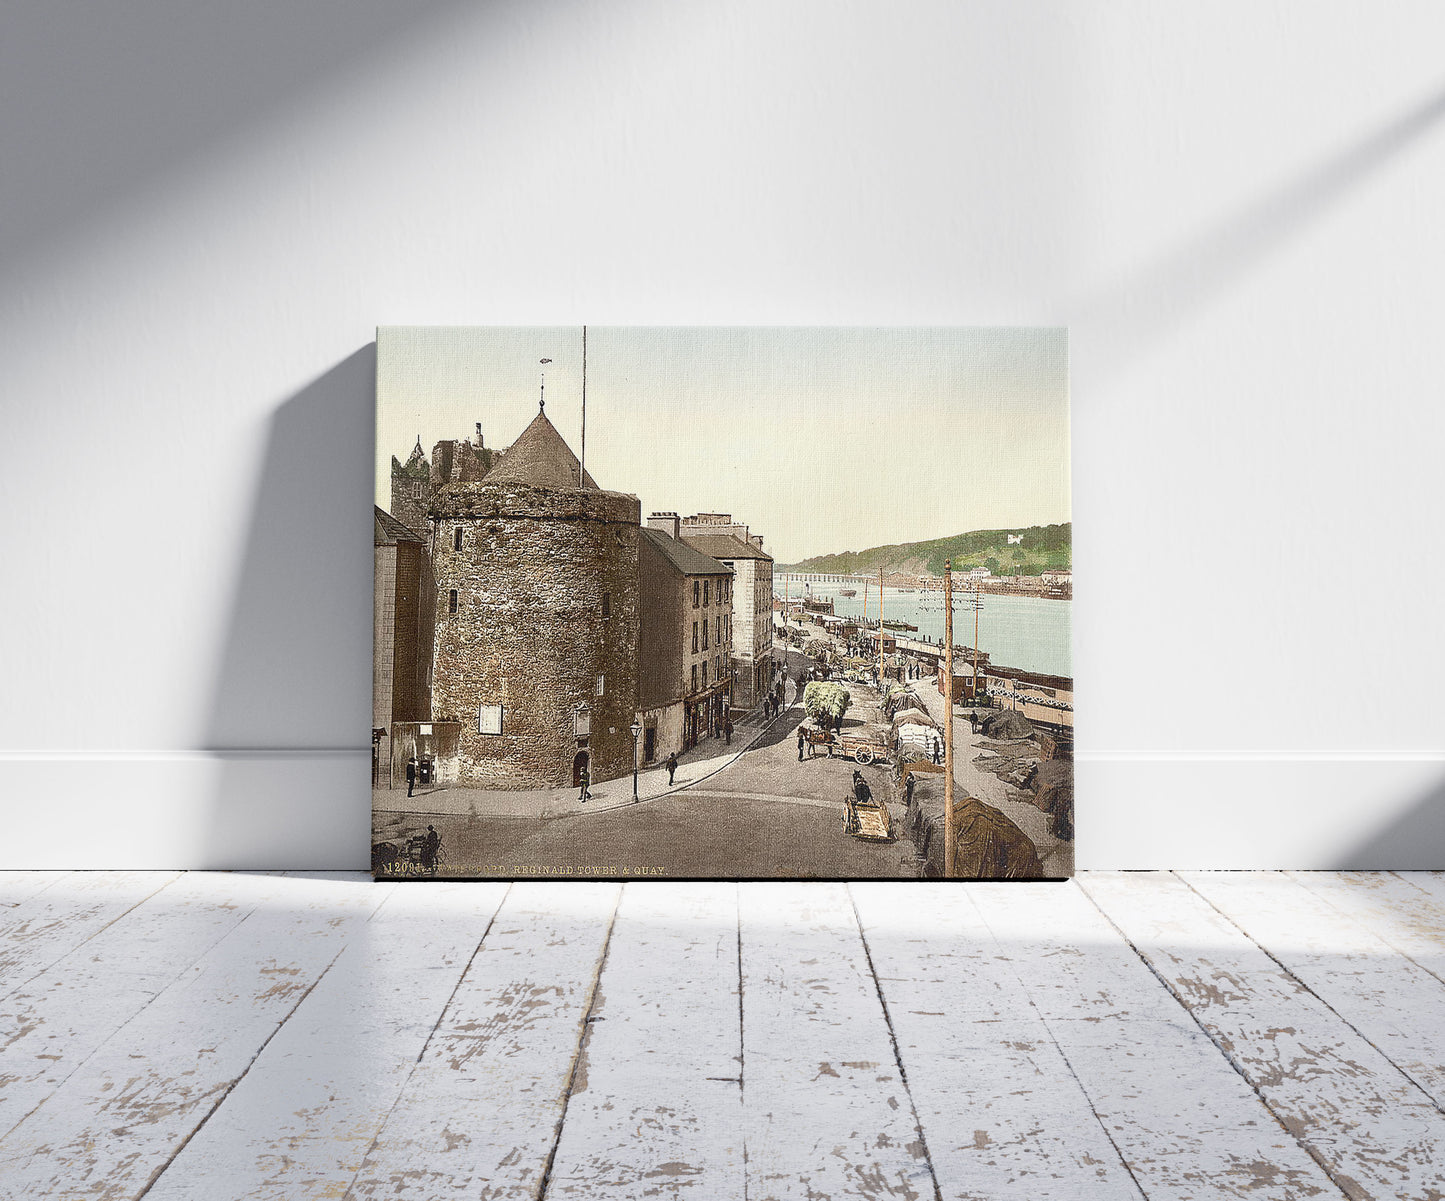 A picture of Reginald Tower and Quay, Waterford. County Waterford, Ireland